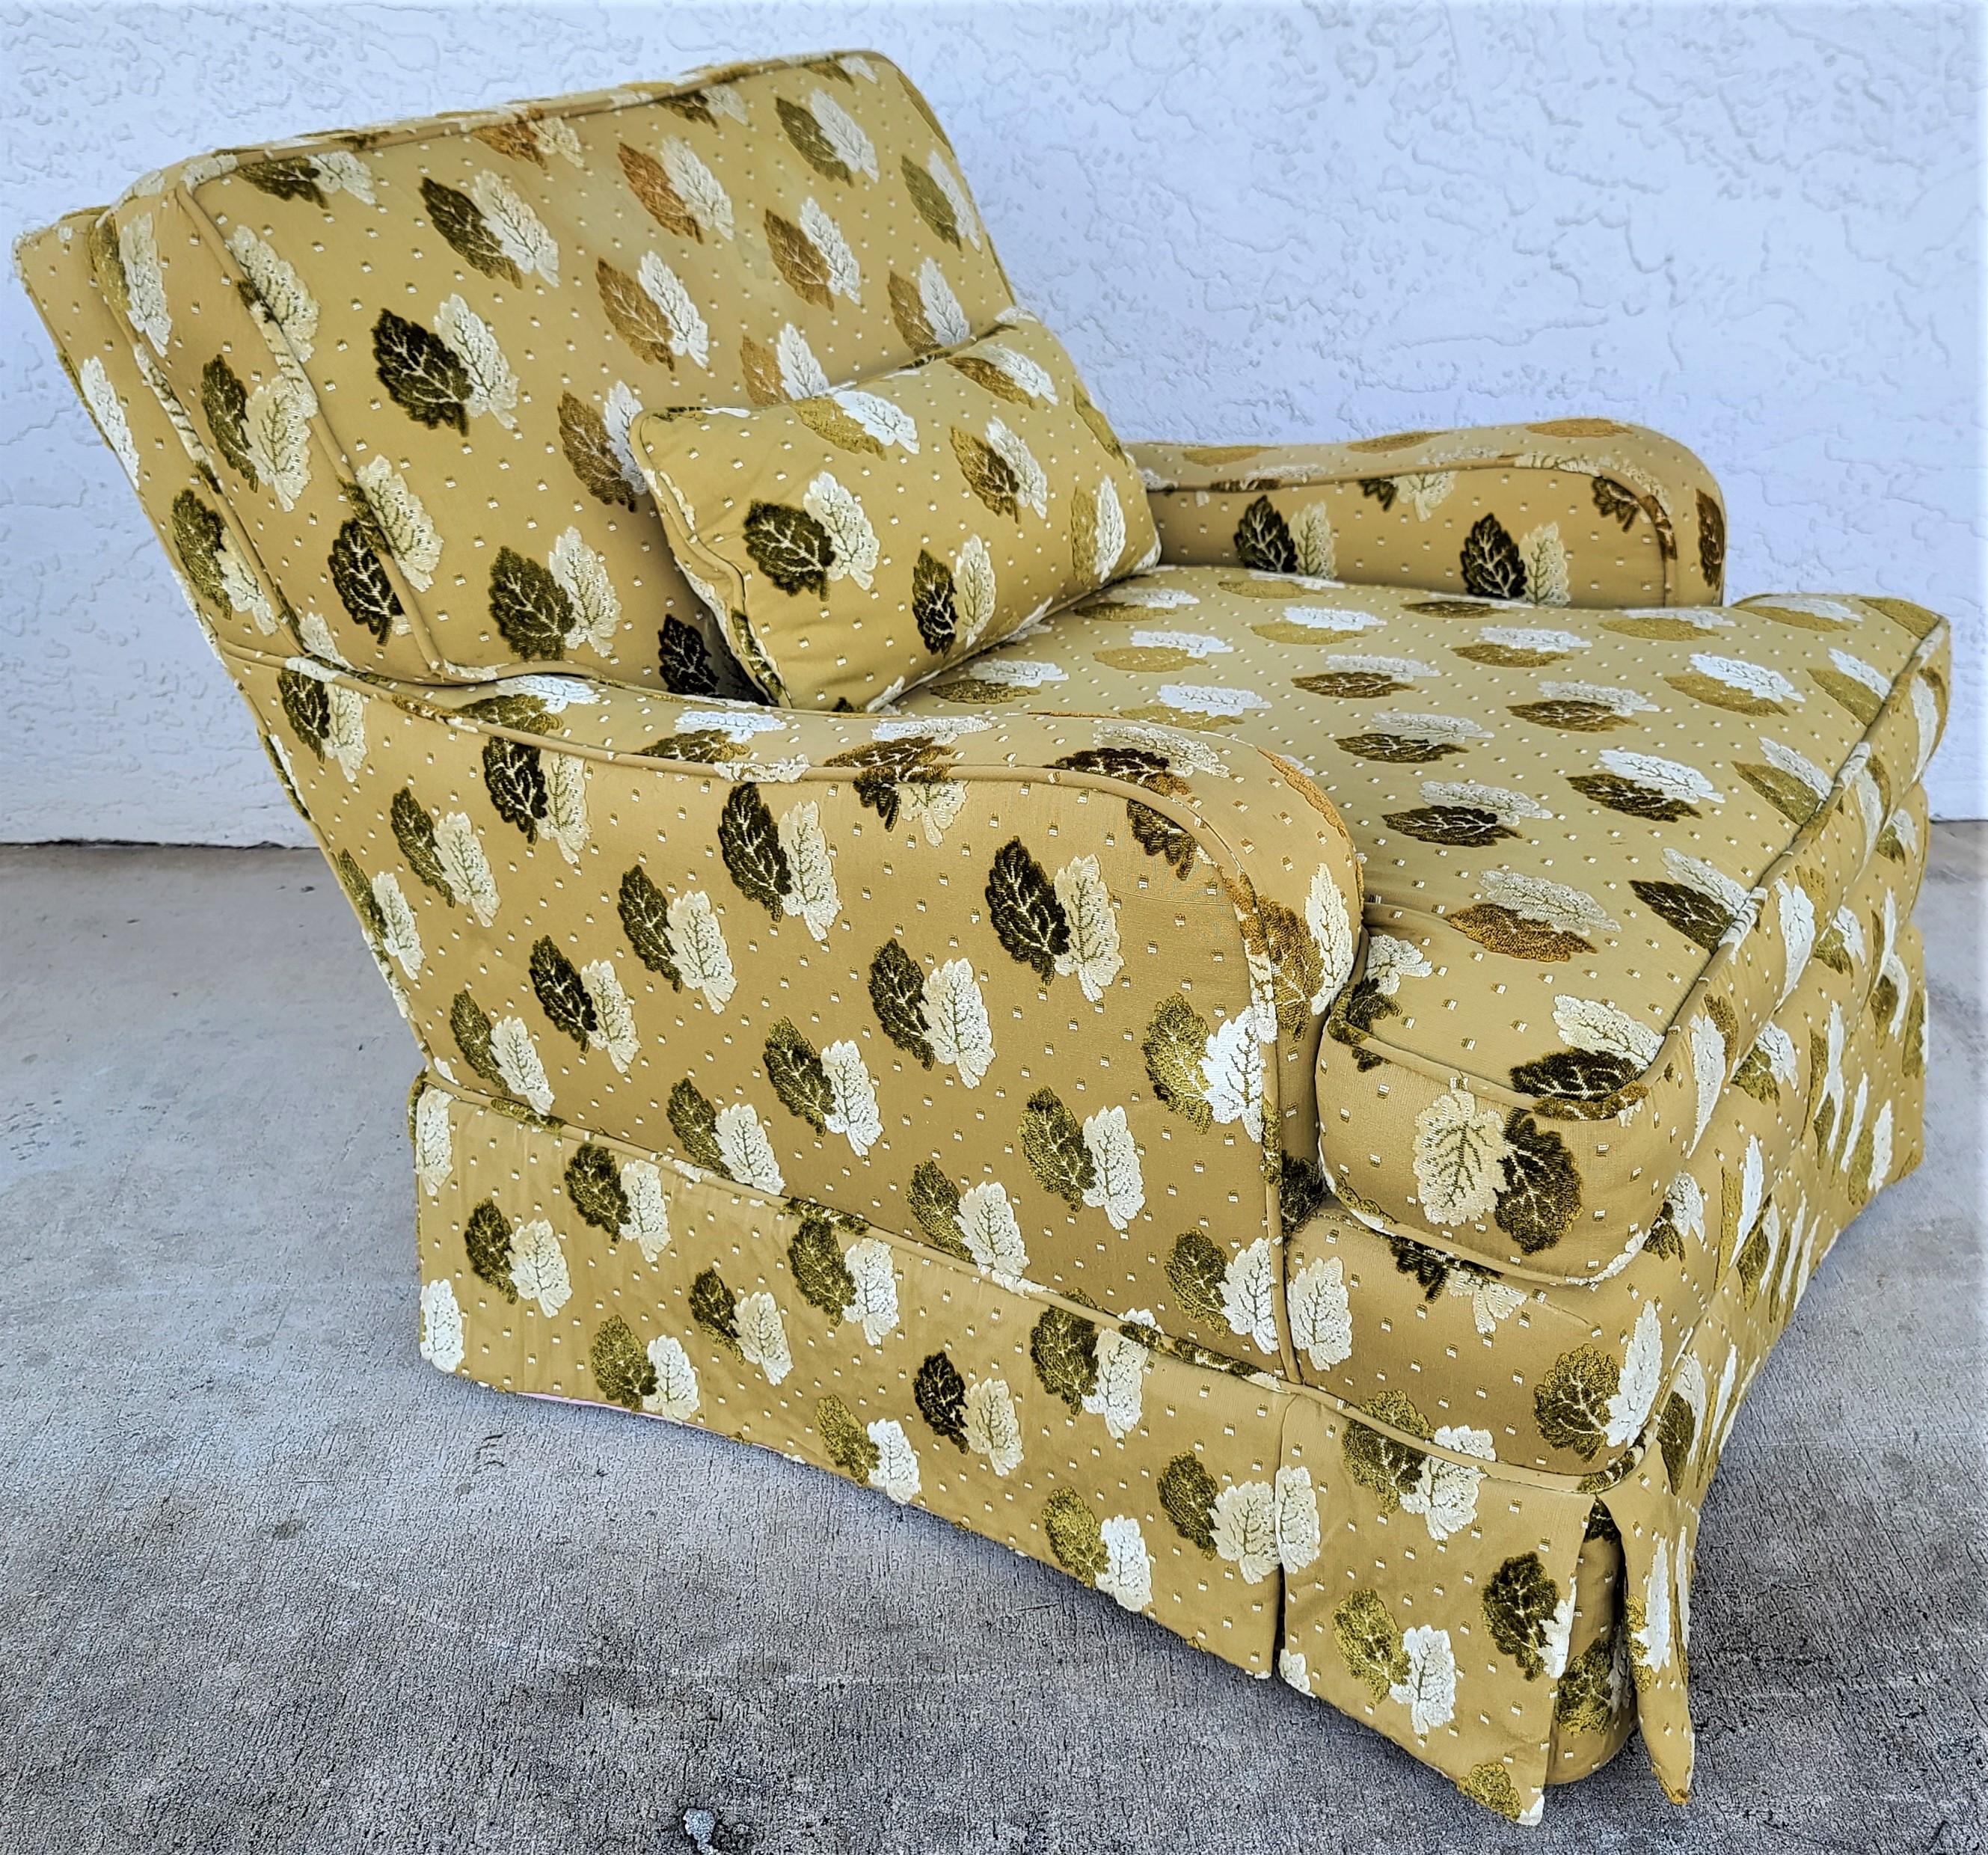 Offering one of our recent Palm Beach Estate fine furniture acquisitions of a
Vintage Rolling lounge club chair with burnout velvet leaves cotton fabric
Very Comfortable with back bolster pillow included.

Coloration: Photos #2 & 3 are most accurate